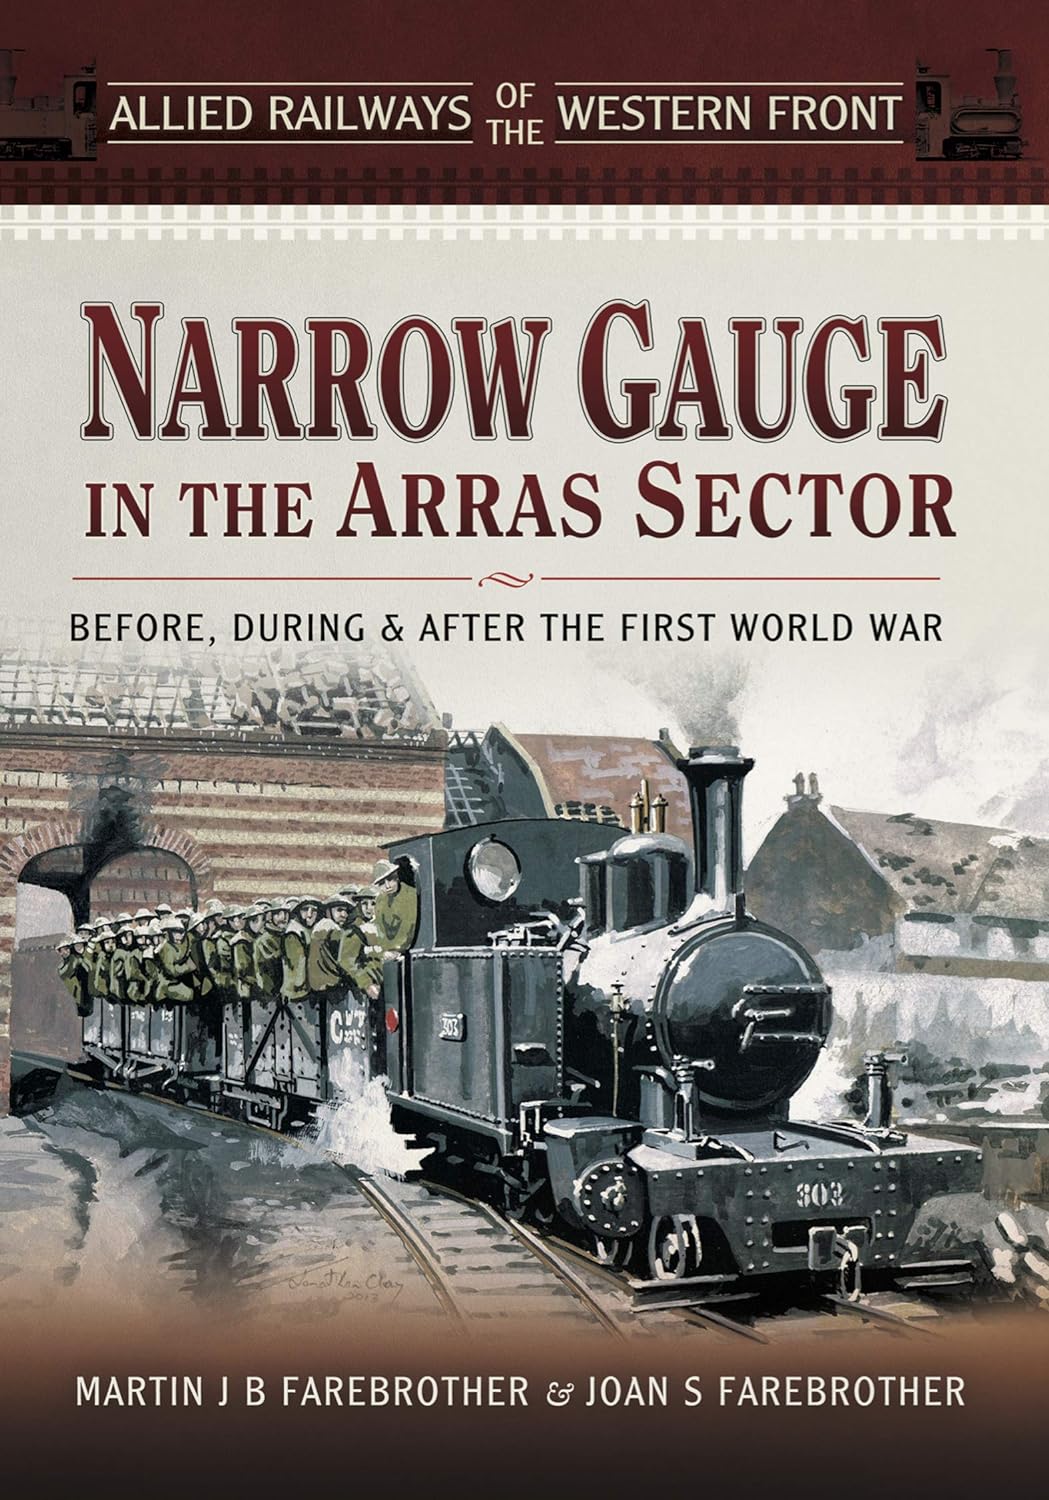 Allied Railways of the Western Front - Narrow Gauge in the Arras Sector - Before, During and After the First World War